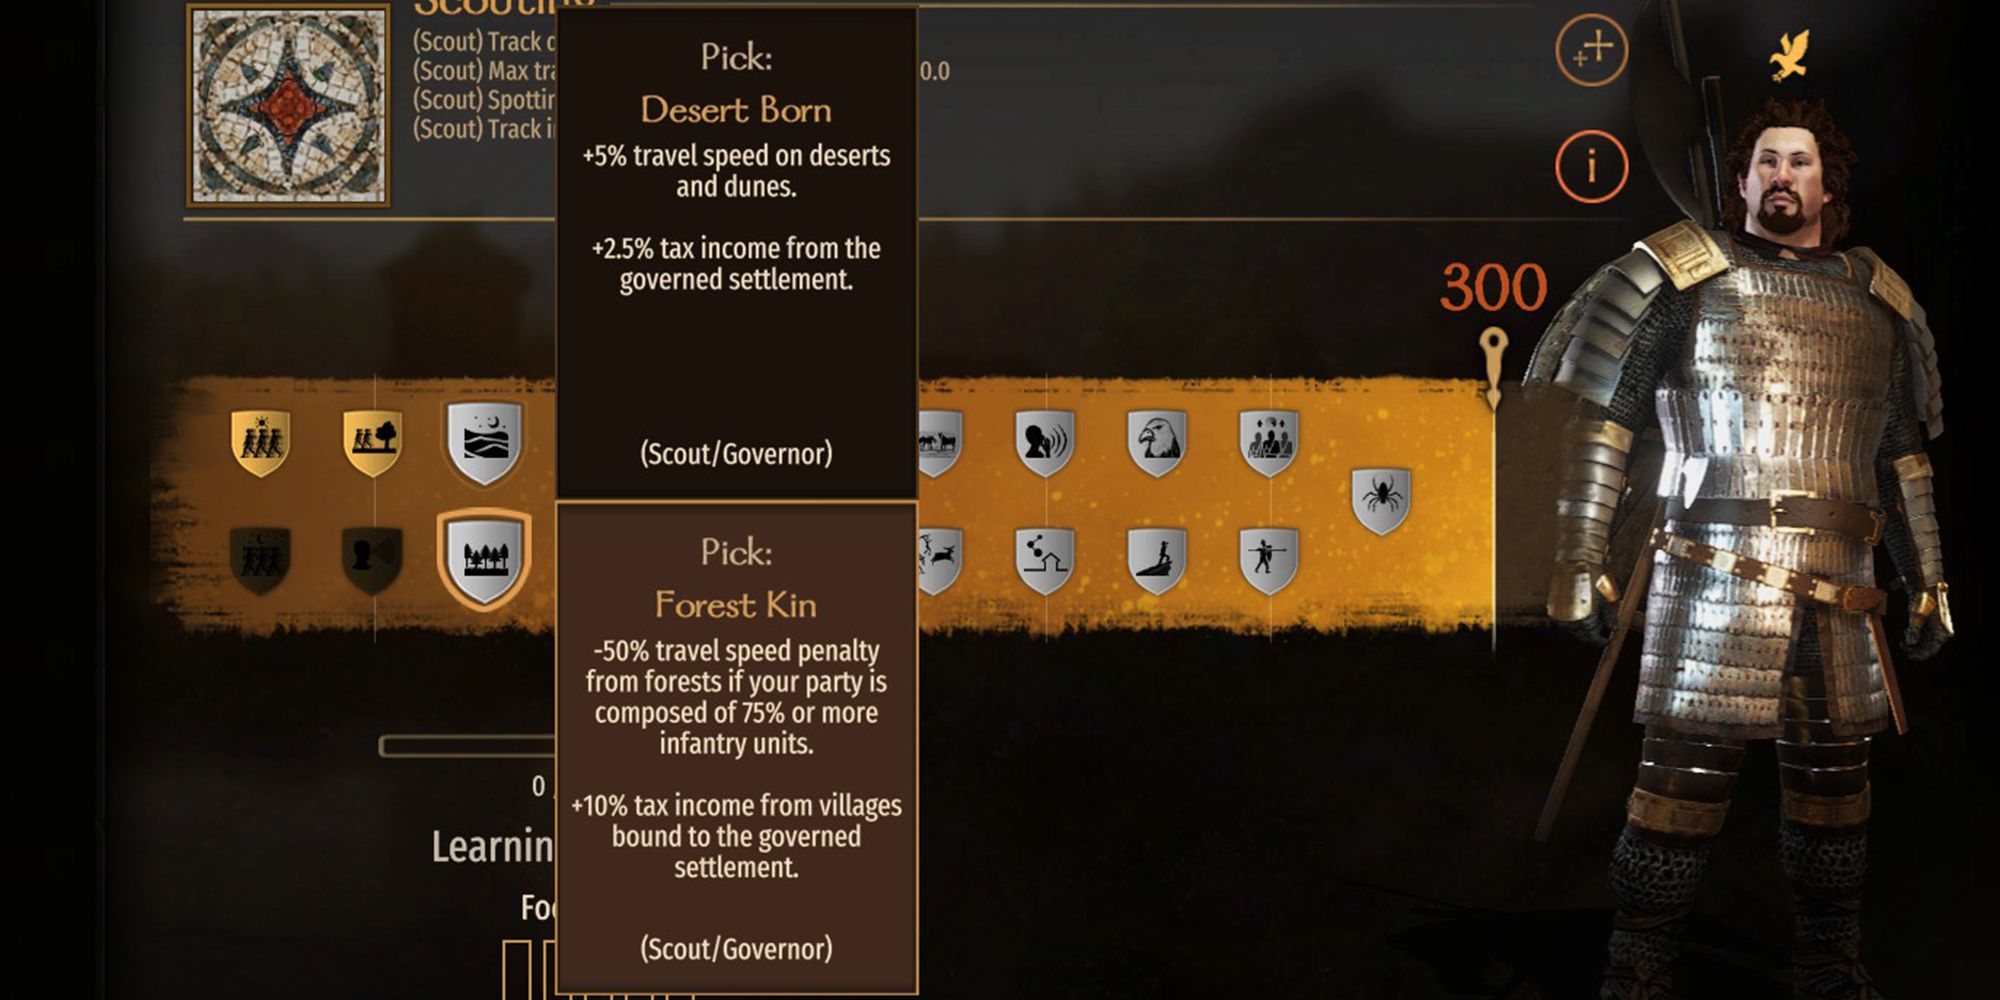 Mount & Blade 2: Bannerlord Forest Kin Perk: -50% movement speed penalty out of forests if party consists of 75% or more infantry units. +10% tax revenue from villages bound to governed settlements.